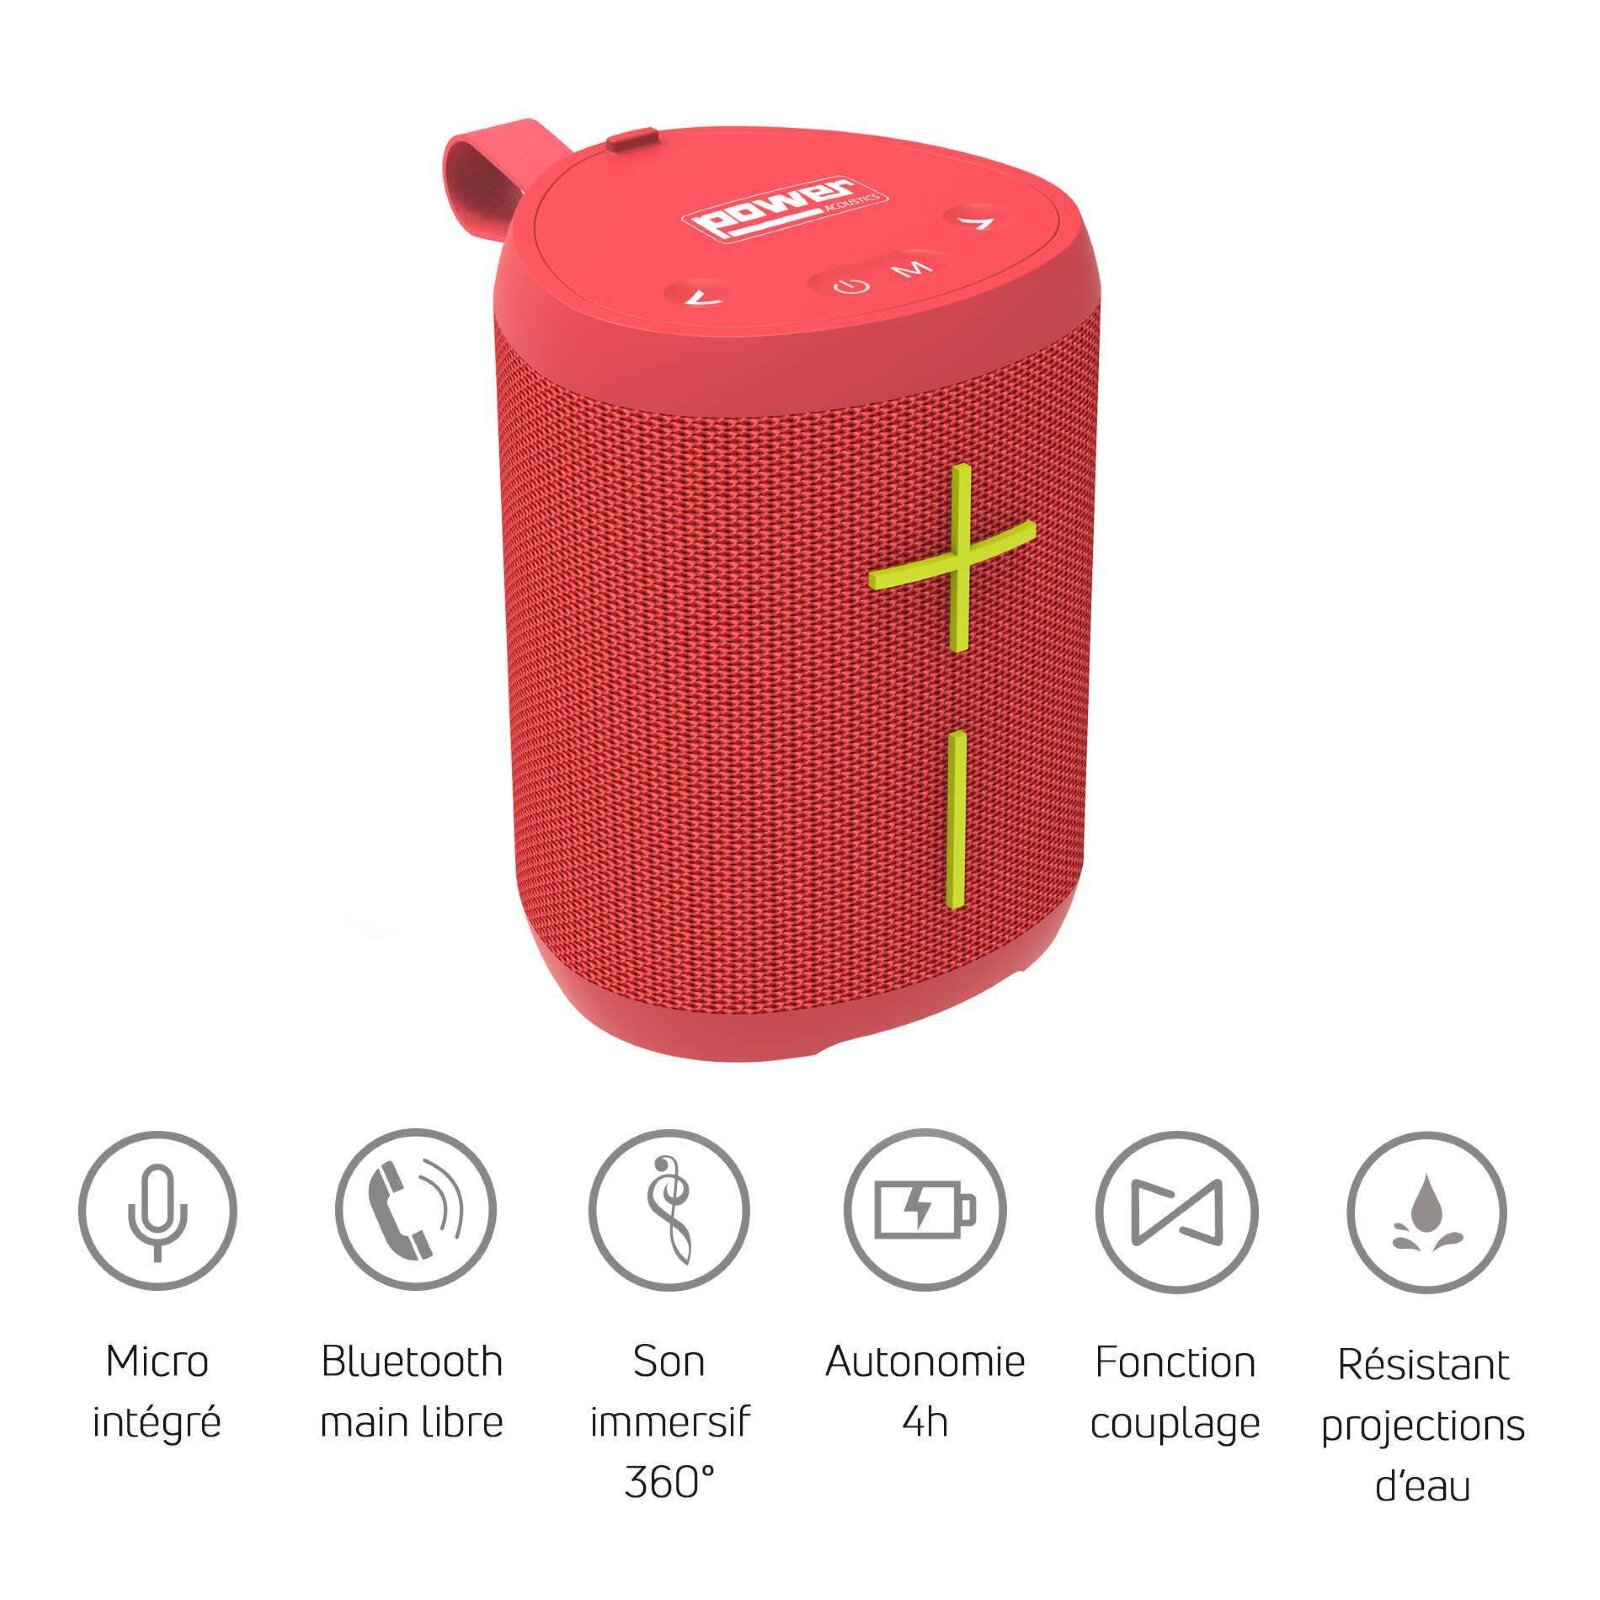 Power Acoustics RED Portable Compact Bluetooth Speaker - Red Color (GETONE 20) : photo 1